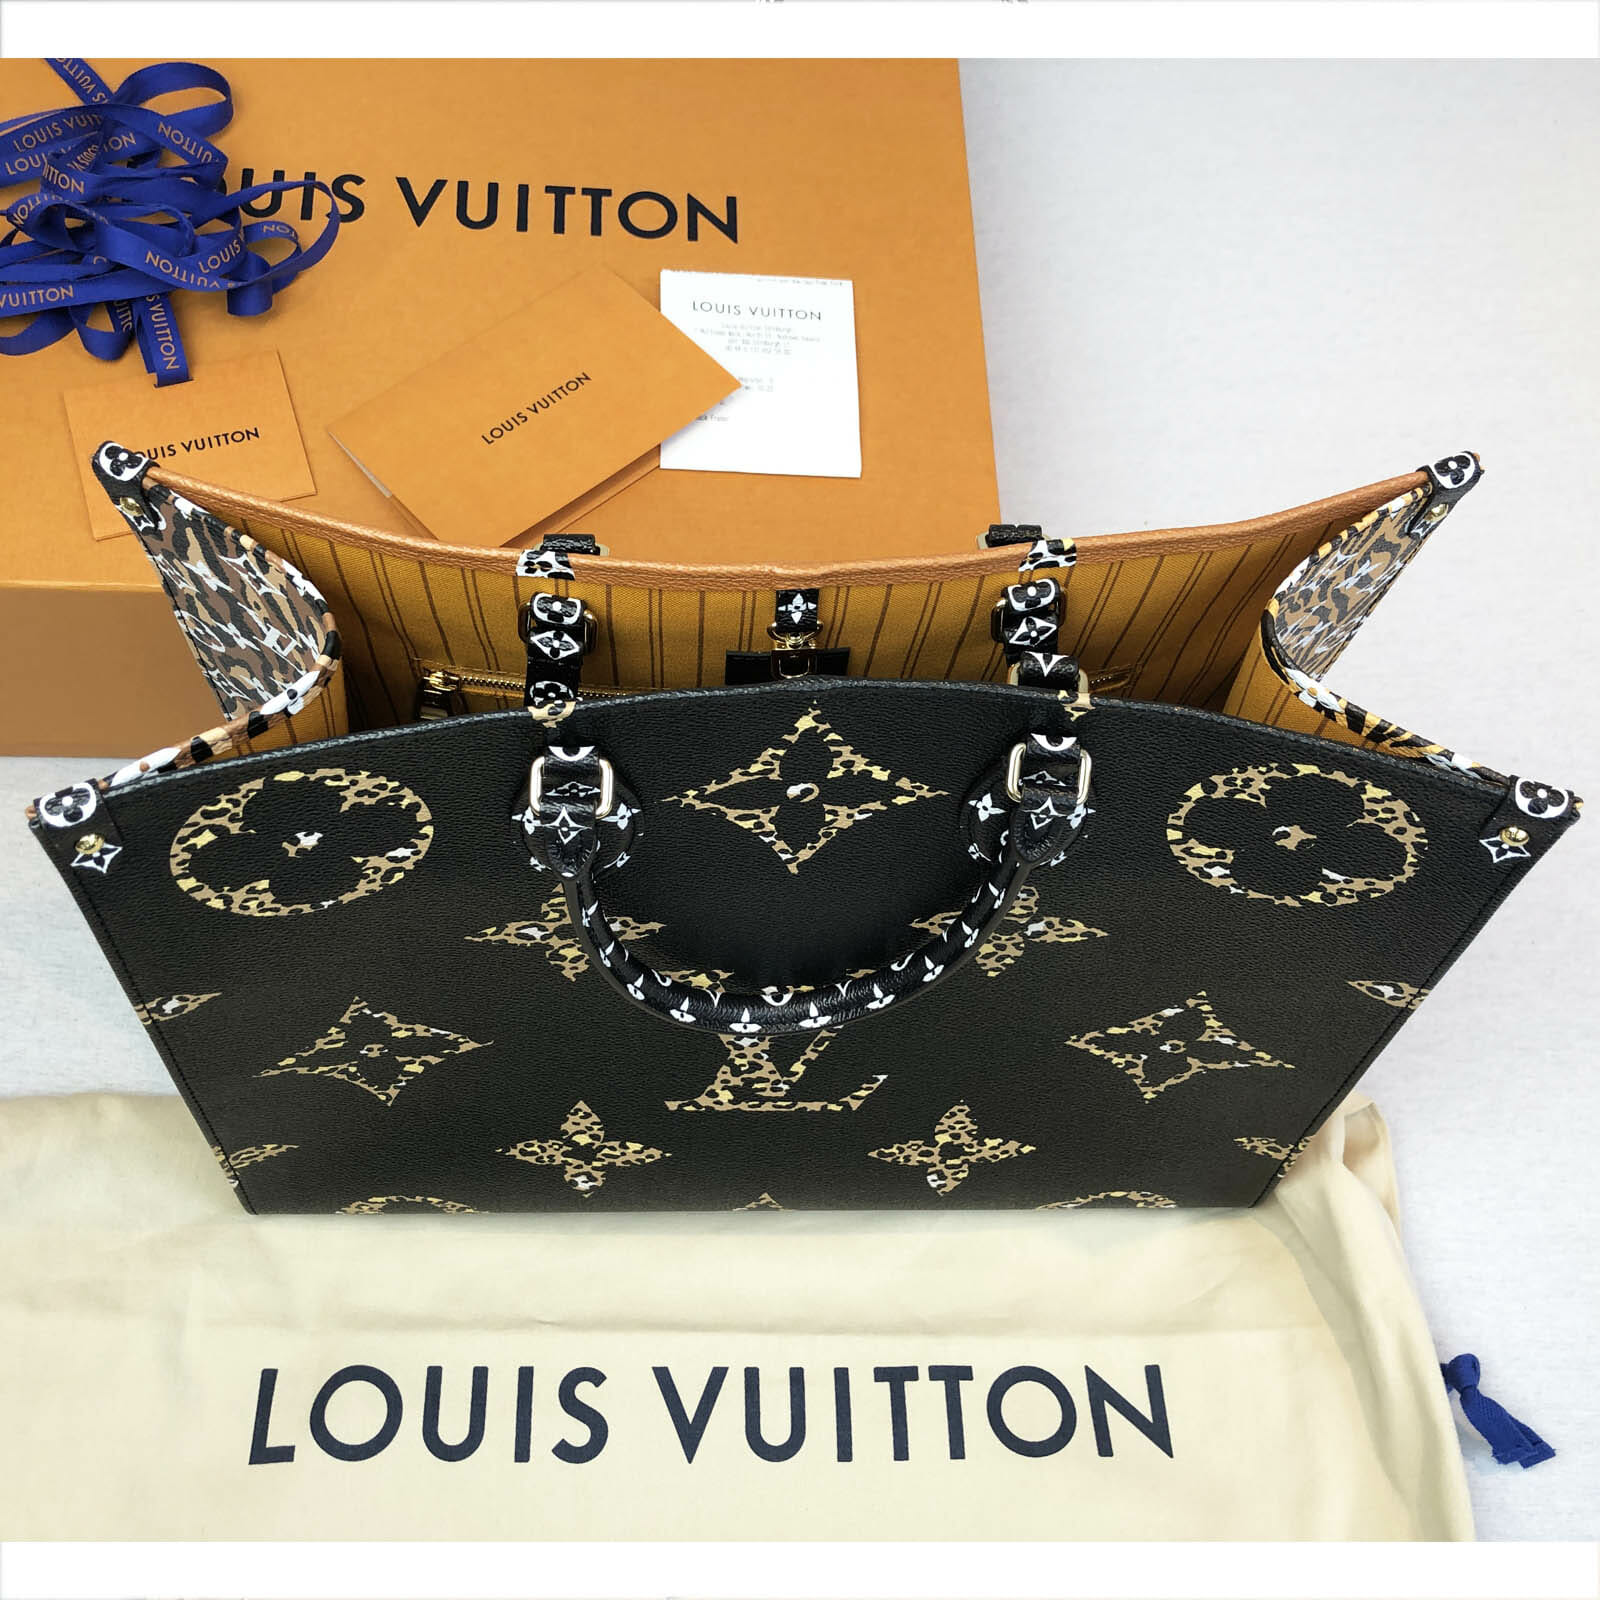 NEW Louis Vuitton OnTheGo GM Jungle Print Tote Black & Caramel On The Go 